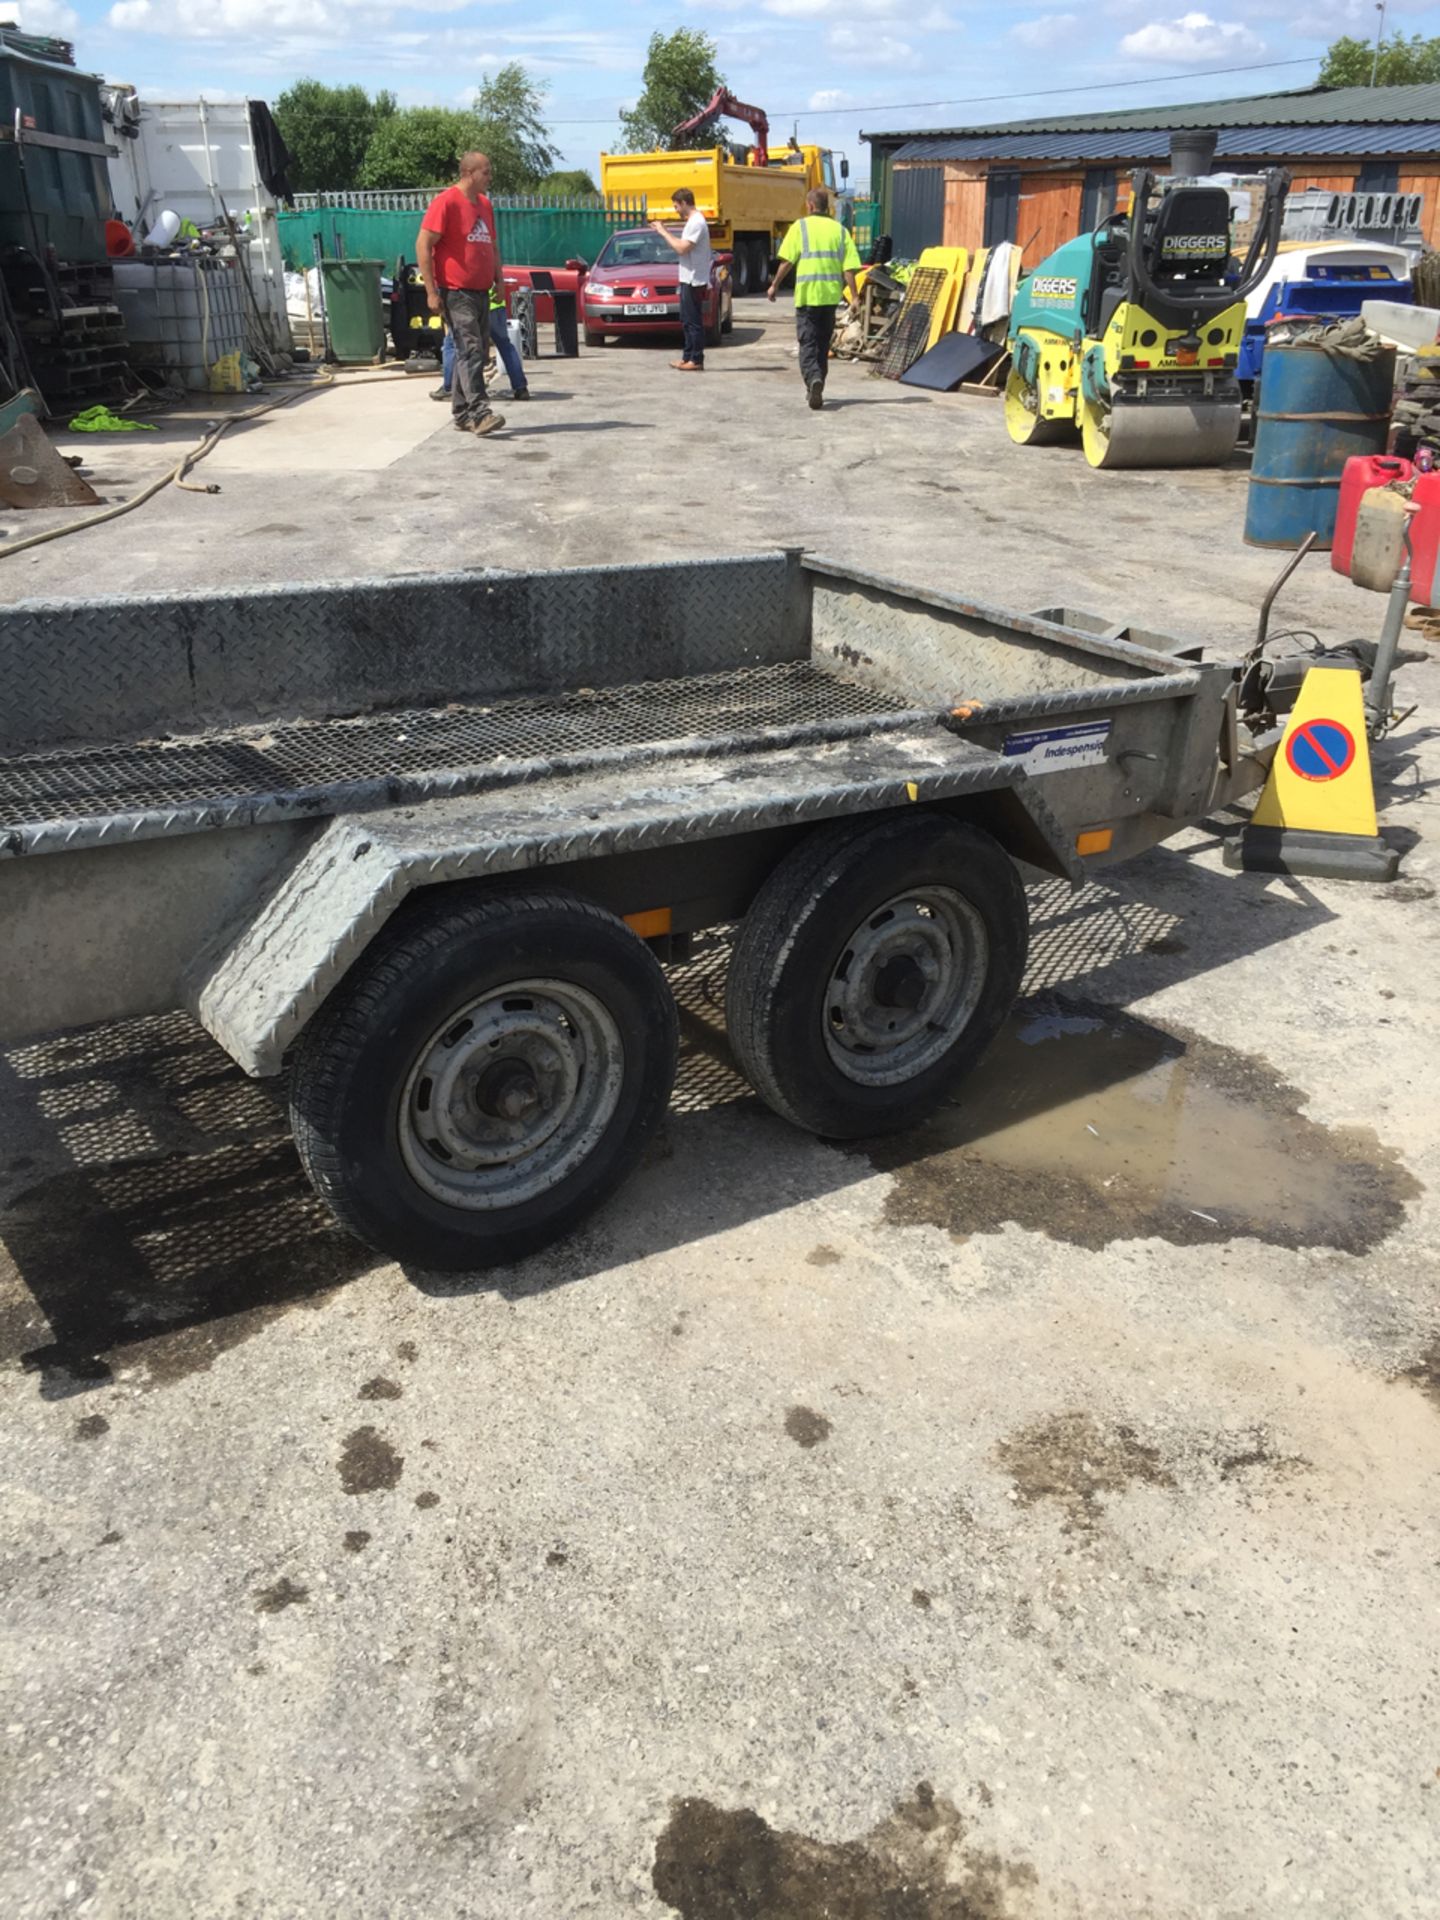 1.5t plant trailer by Indespension. Twin axle - outboard wheels/chqrplt 1 piece mudguards Drop board - Image 10 of 14